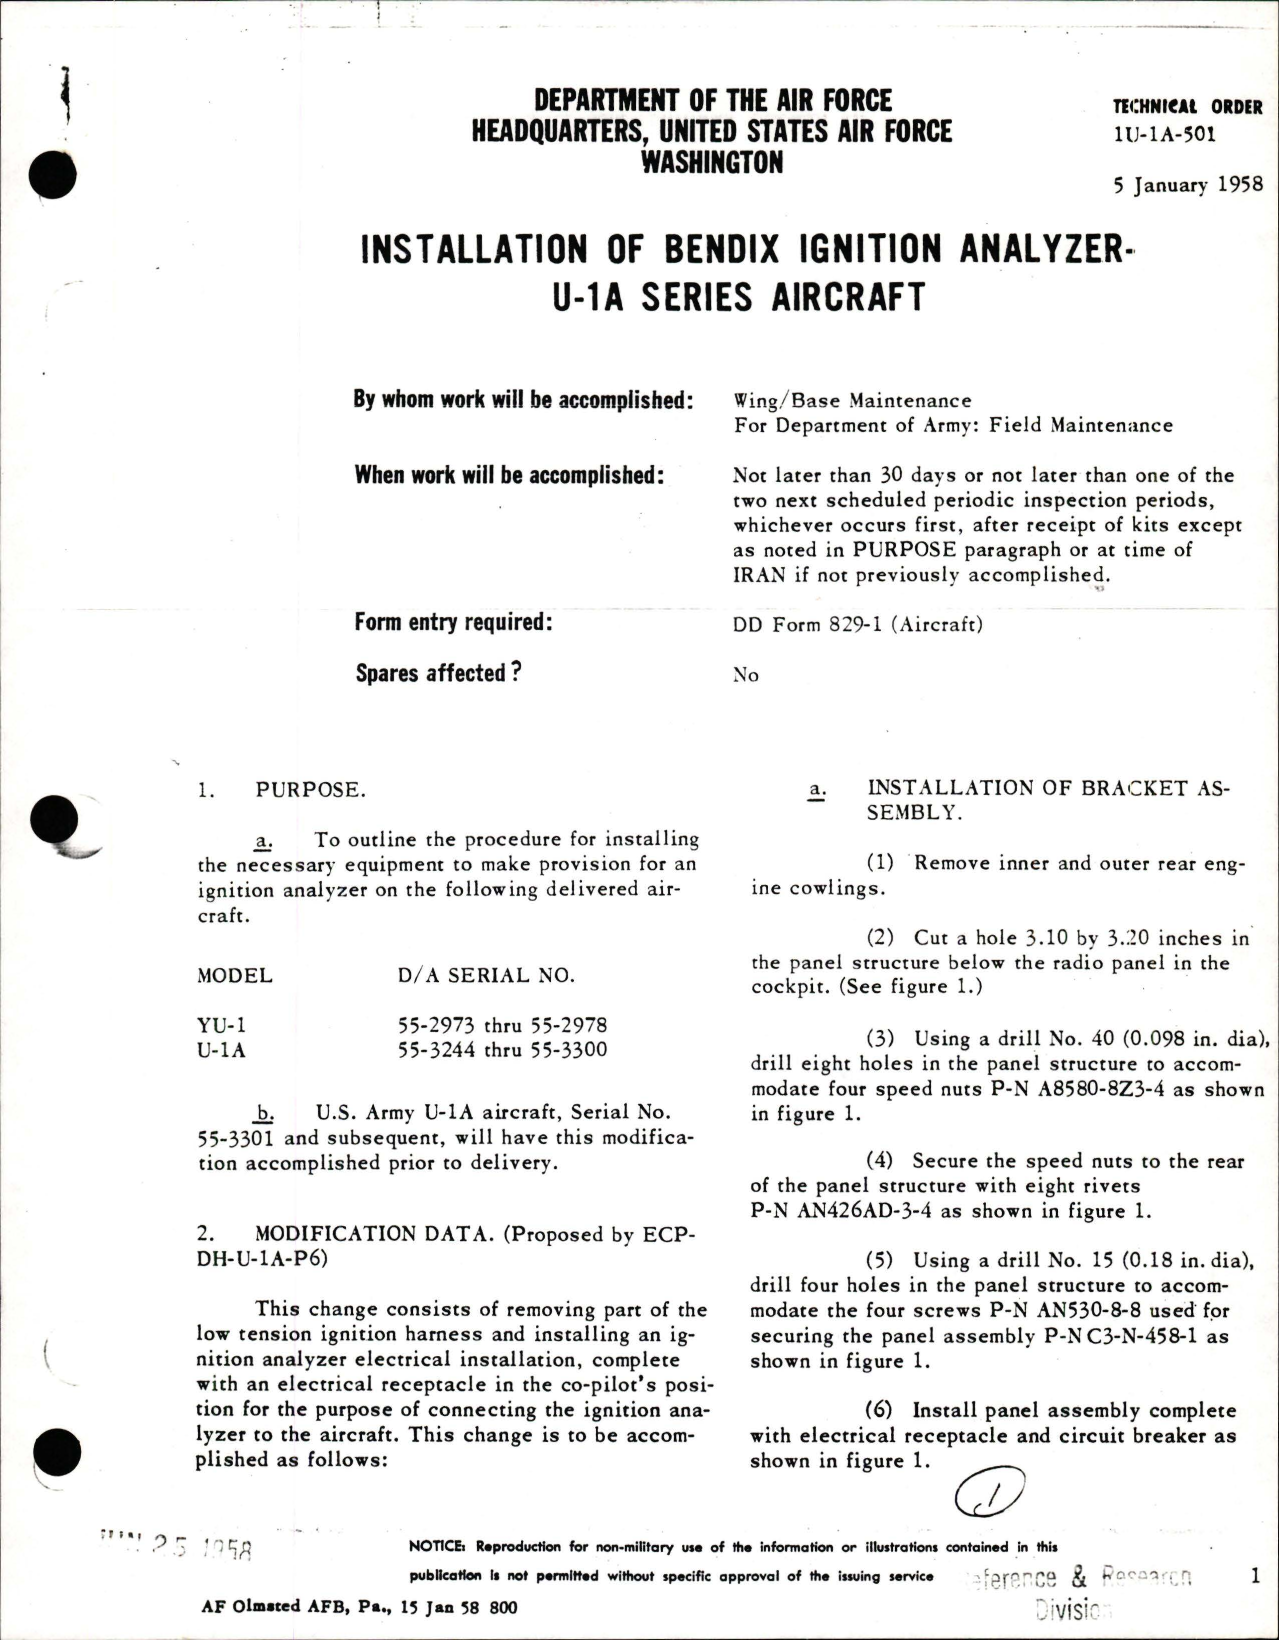 Sample page 1 from AirCorps Library document: Installation of Bendix Ignition Analyzer - U-1A Series